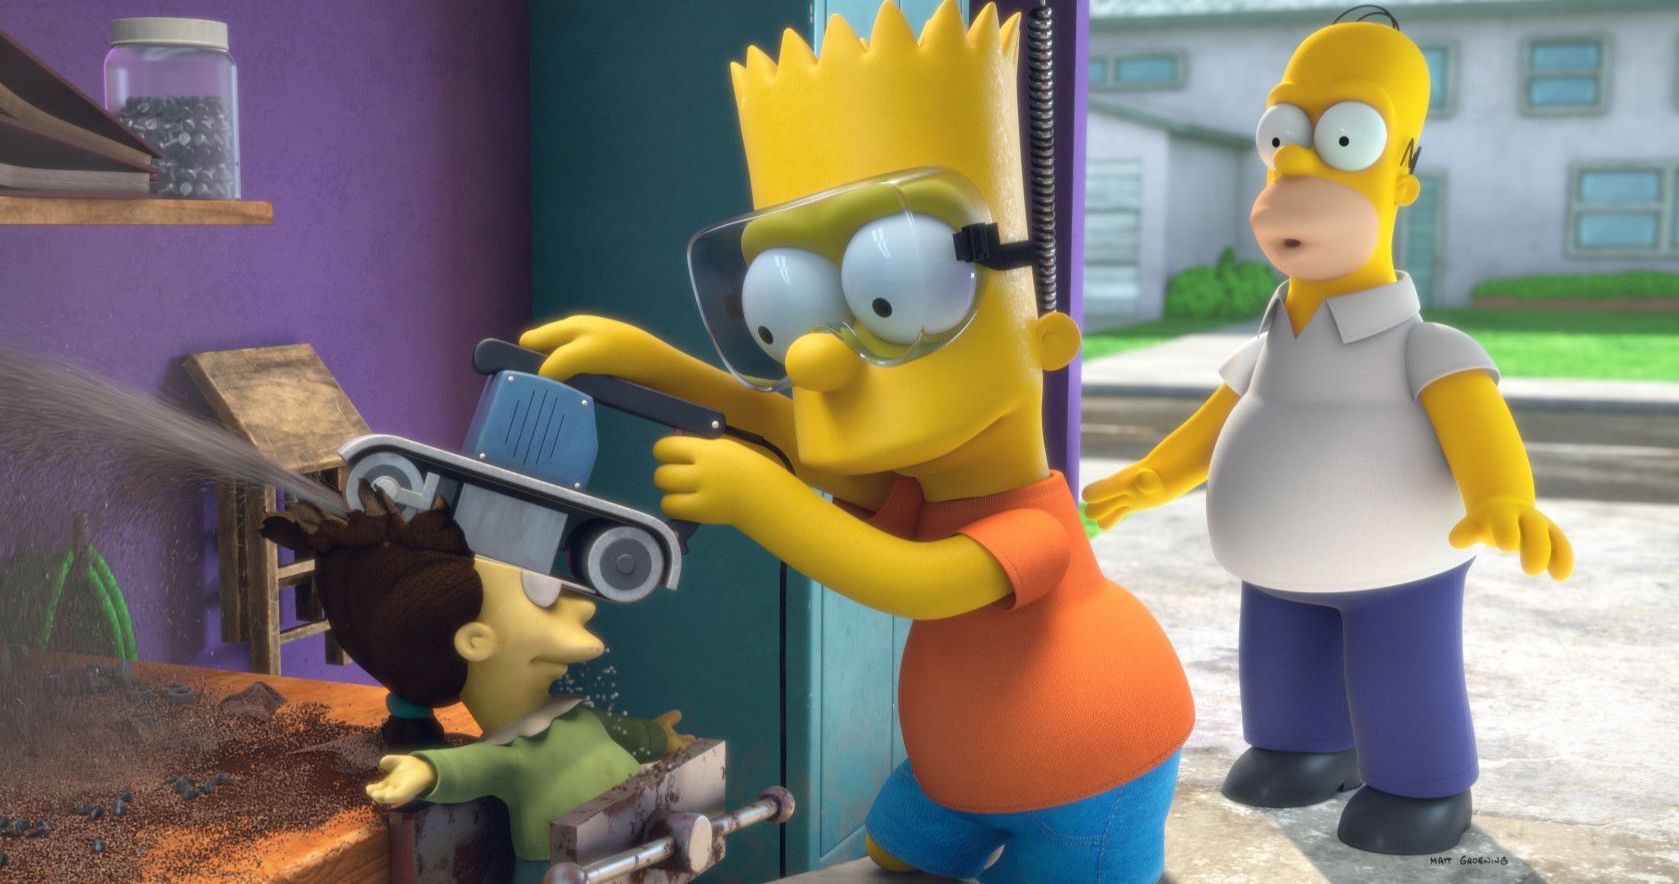 Treehouse of Horror XXXI Sneak Peek Images Give The Simpsons a Pixar Makeover